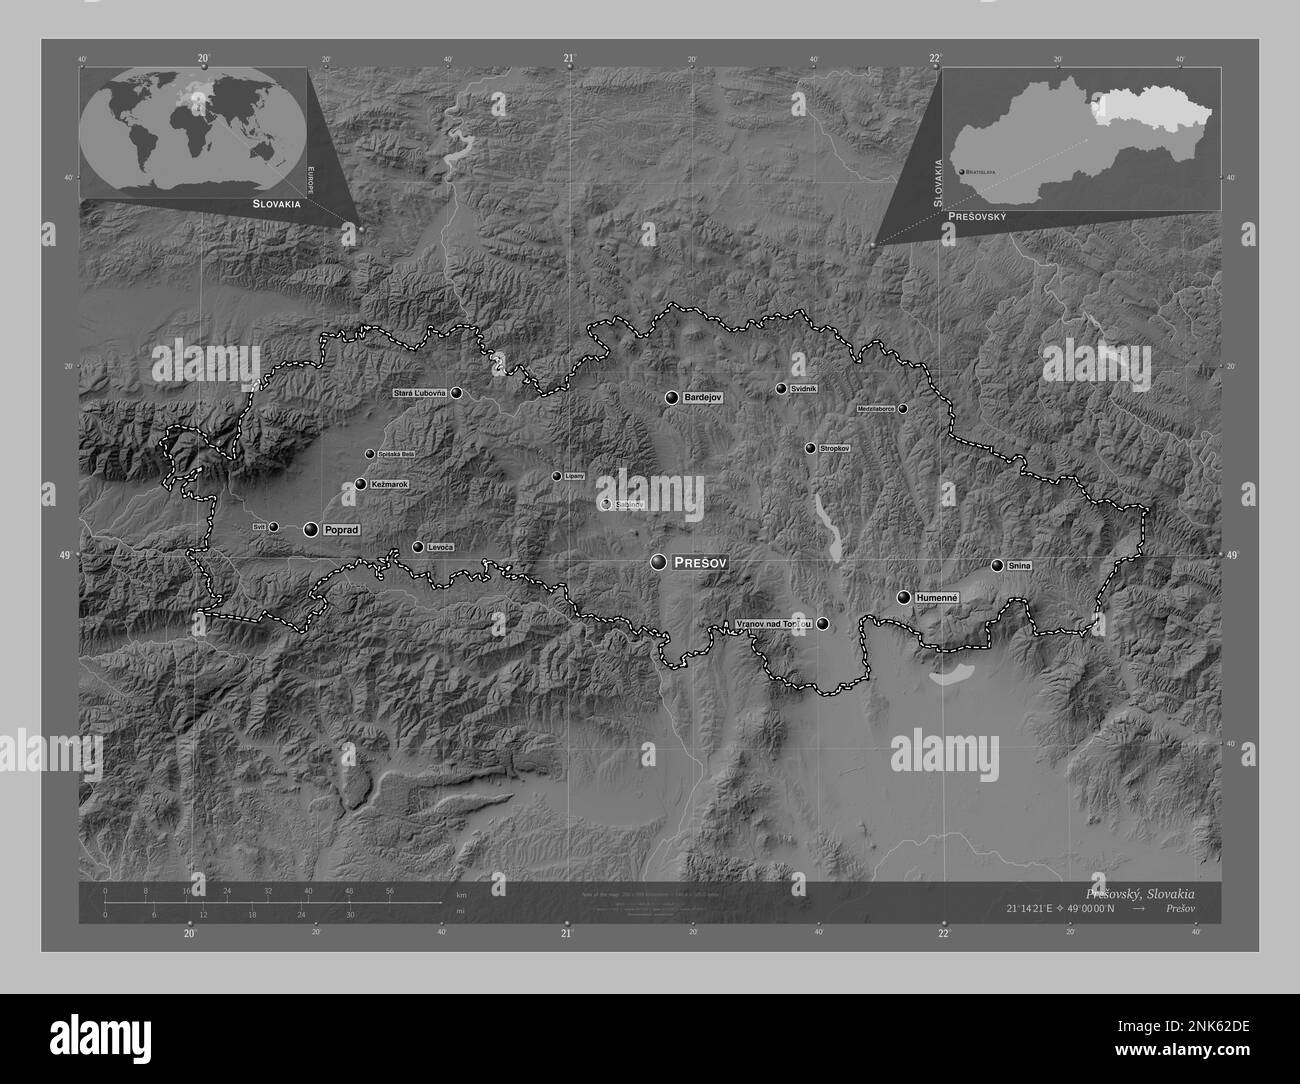 Presovsky, region of Slovakia. Grayscale elevation map with lakes and rivers. Locations and names of major cities of the region. Corner auxiliary loca Stock Photo